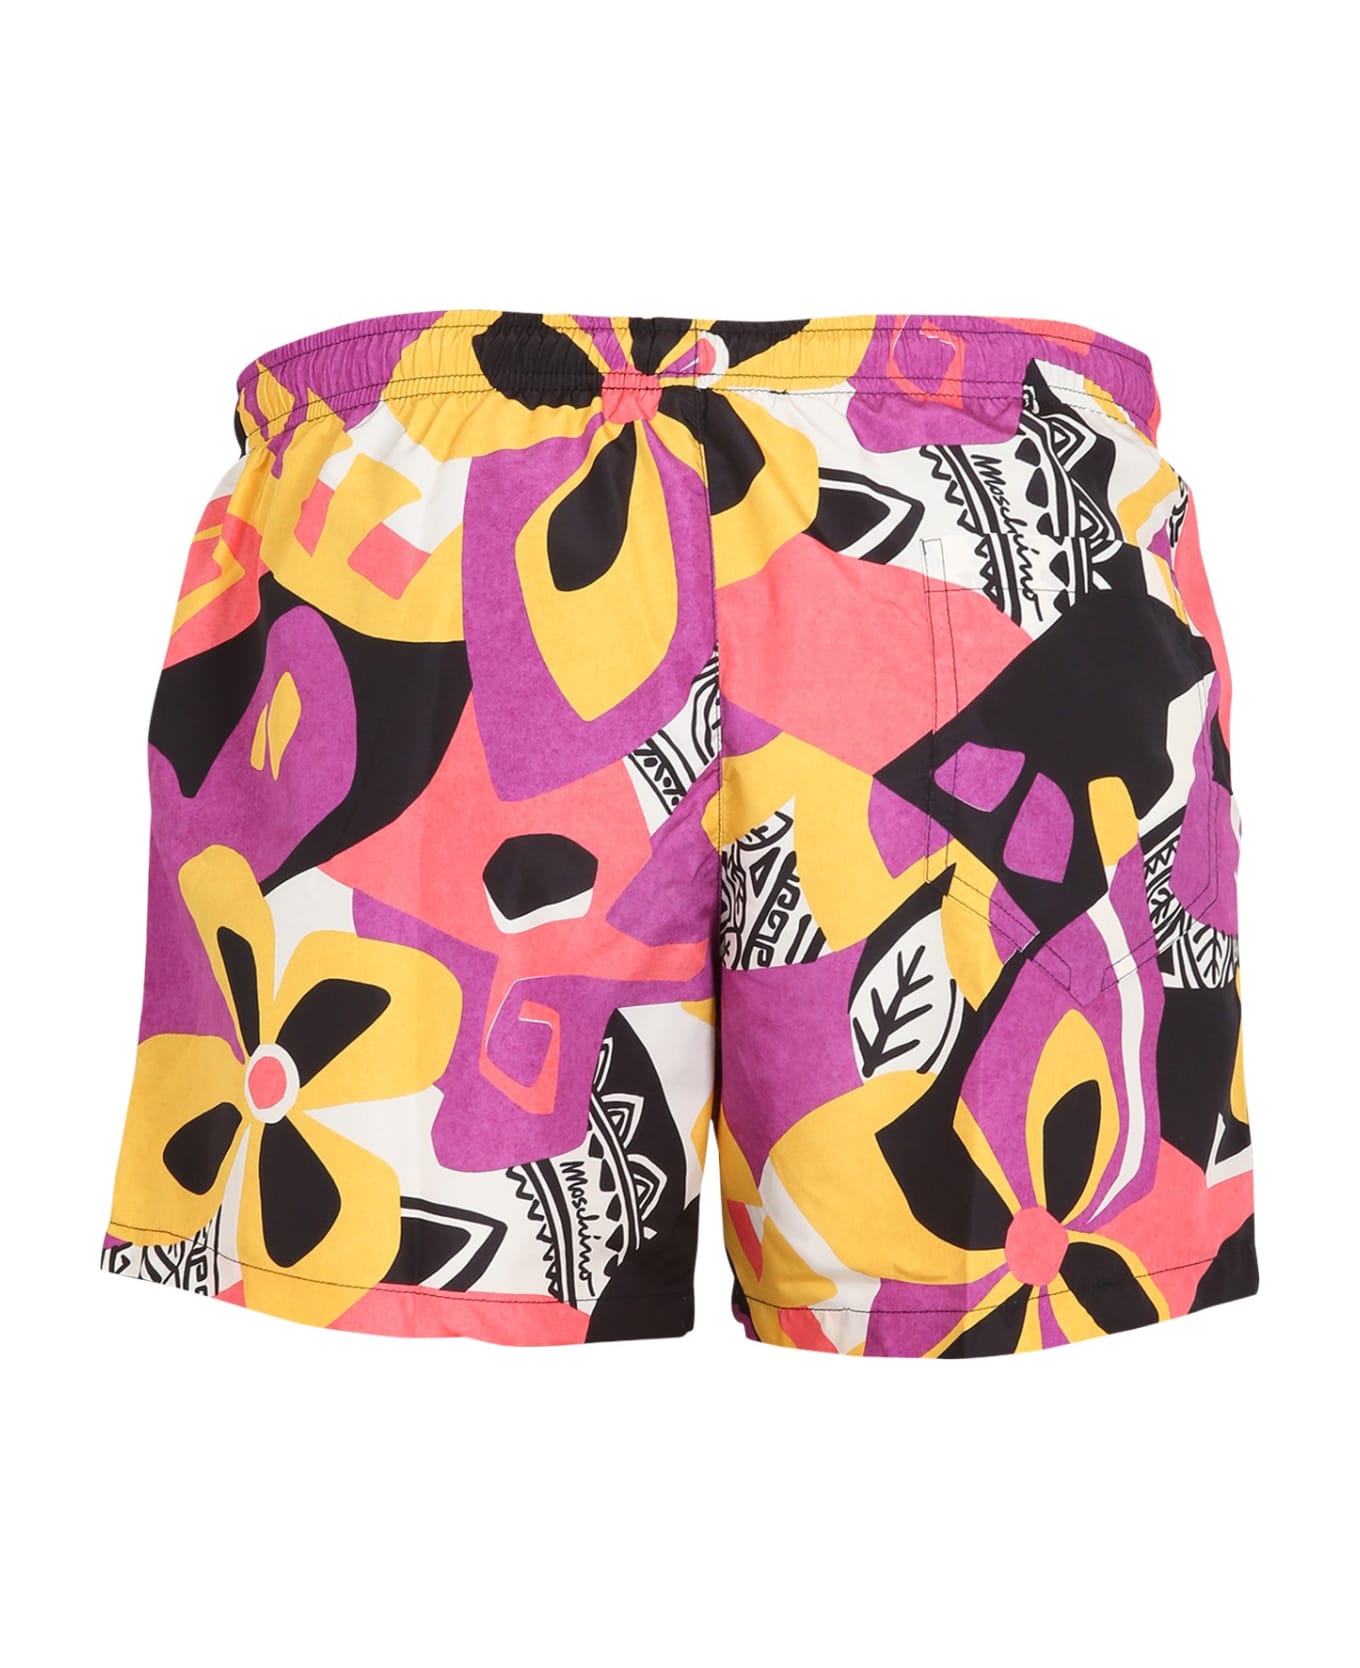 Moschino Psychedelic Print Swimsuit - MULTICOLOR